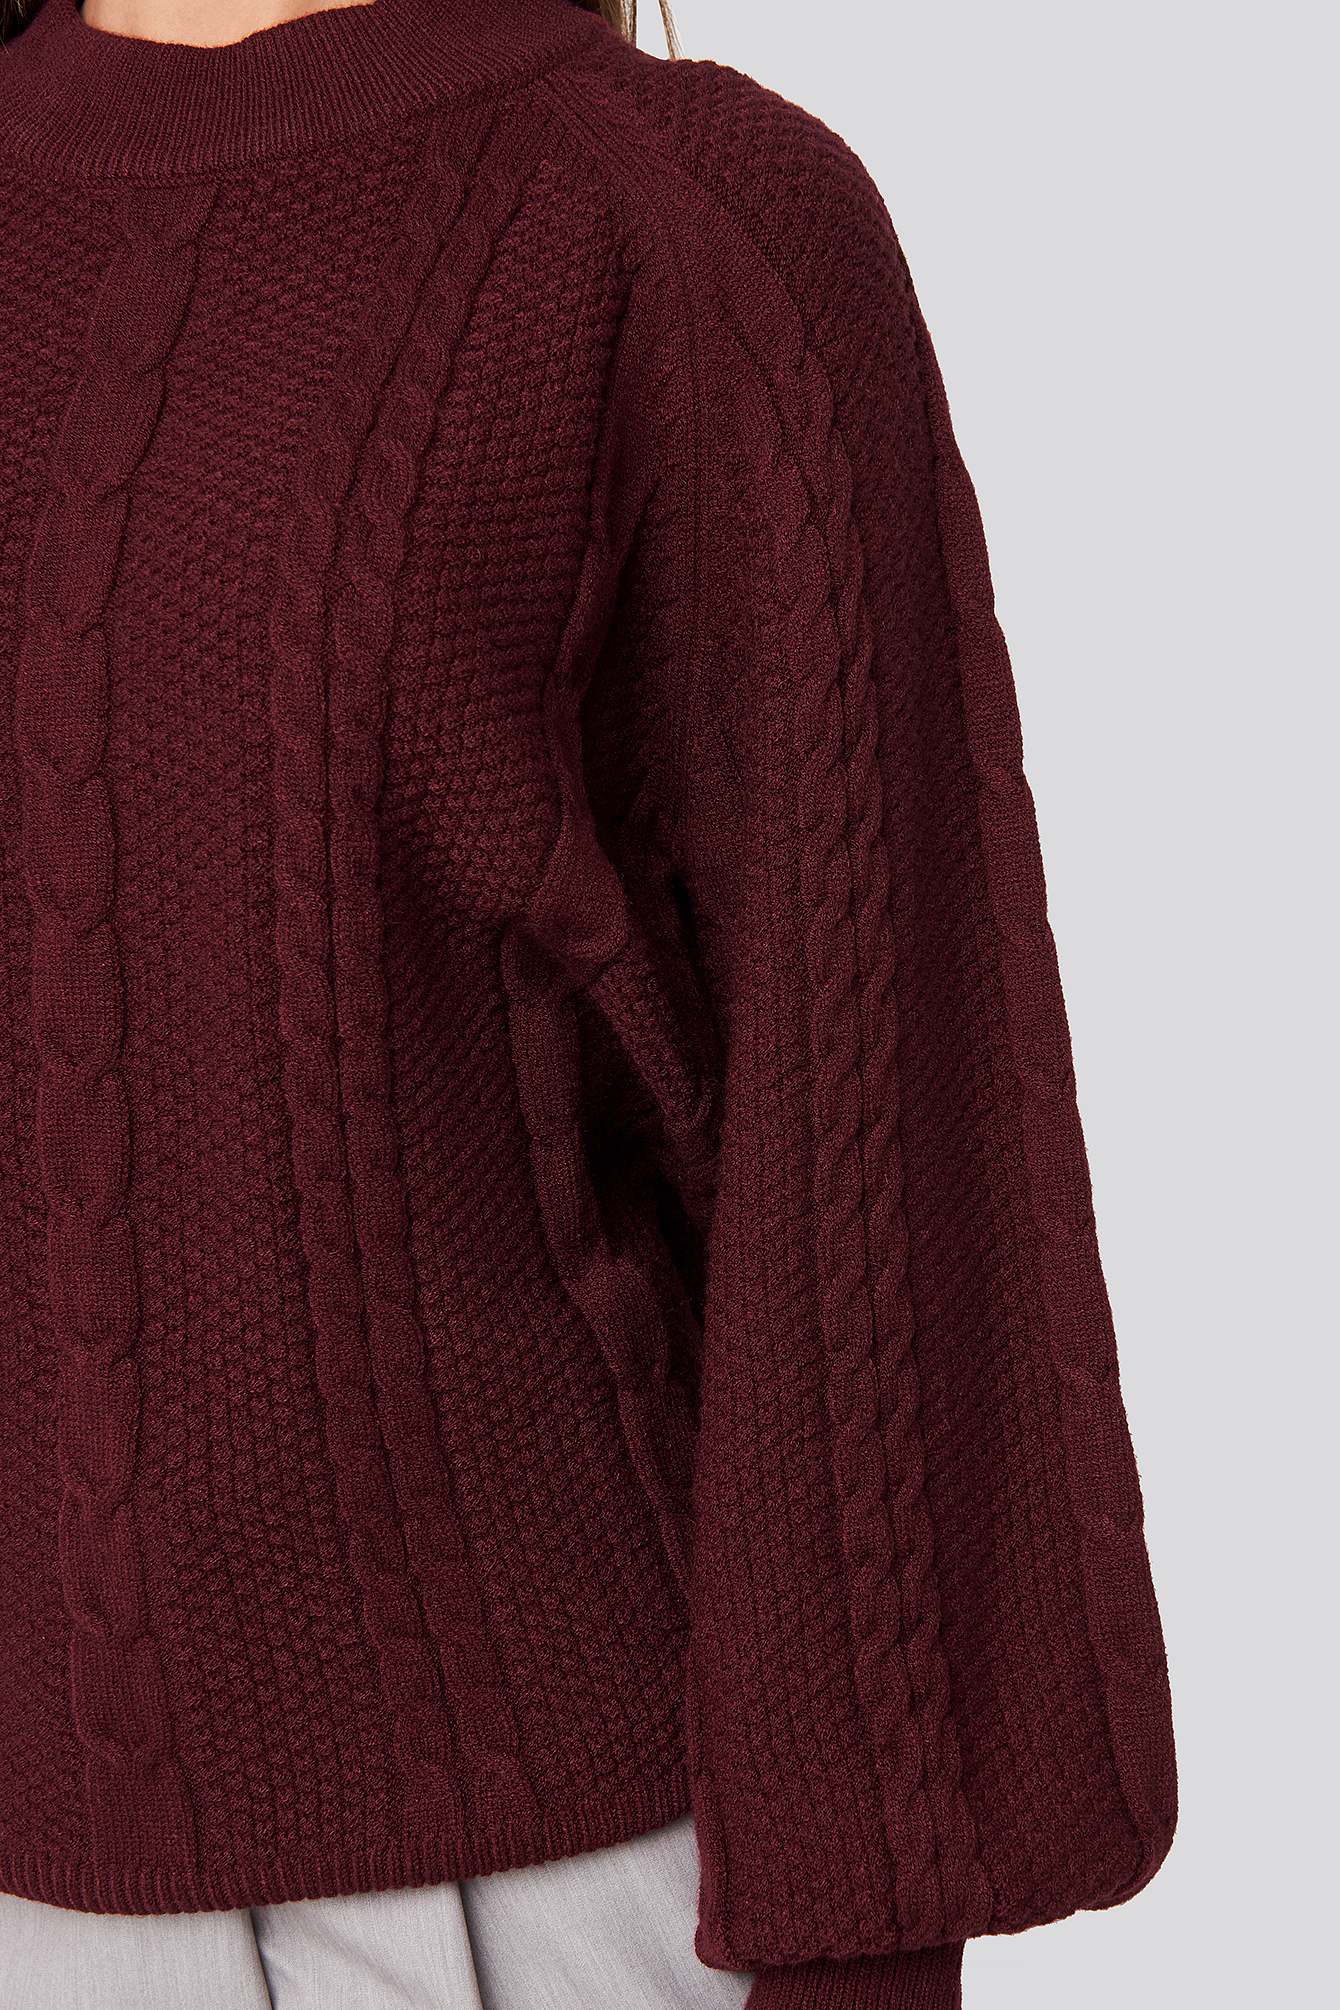 Burgundy Balloon Sleeve Cable Knitted Sweater